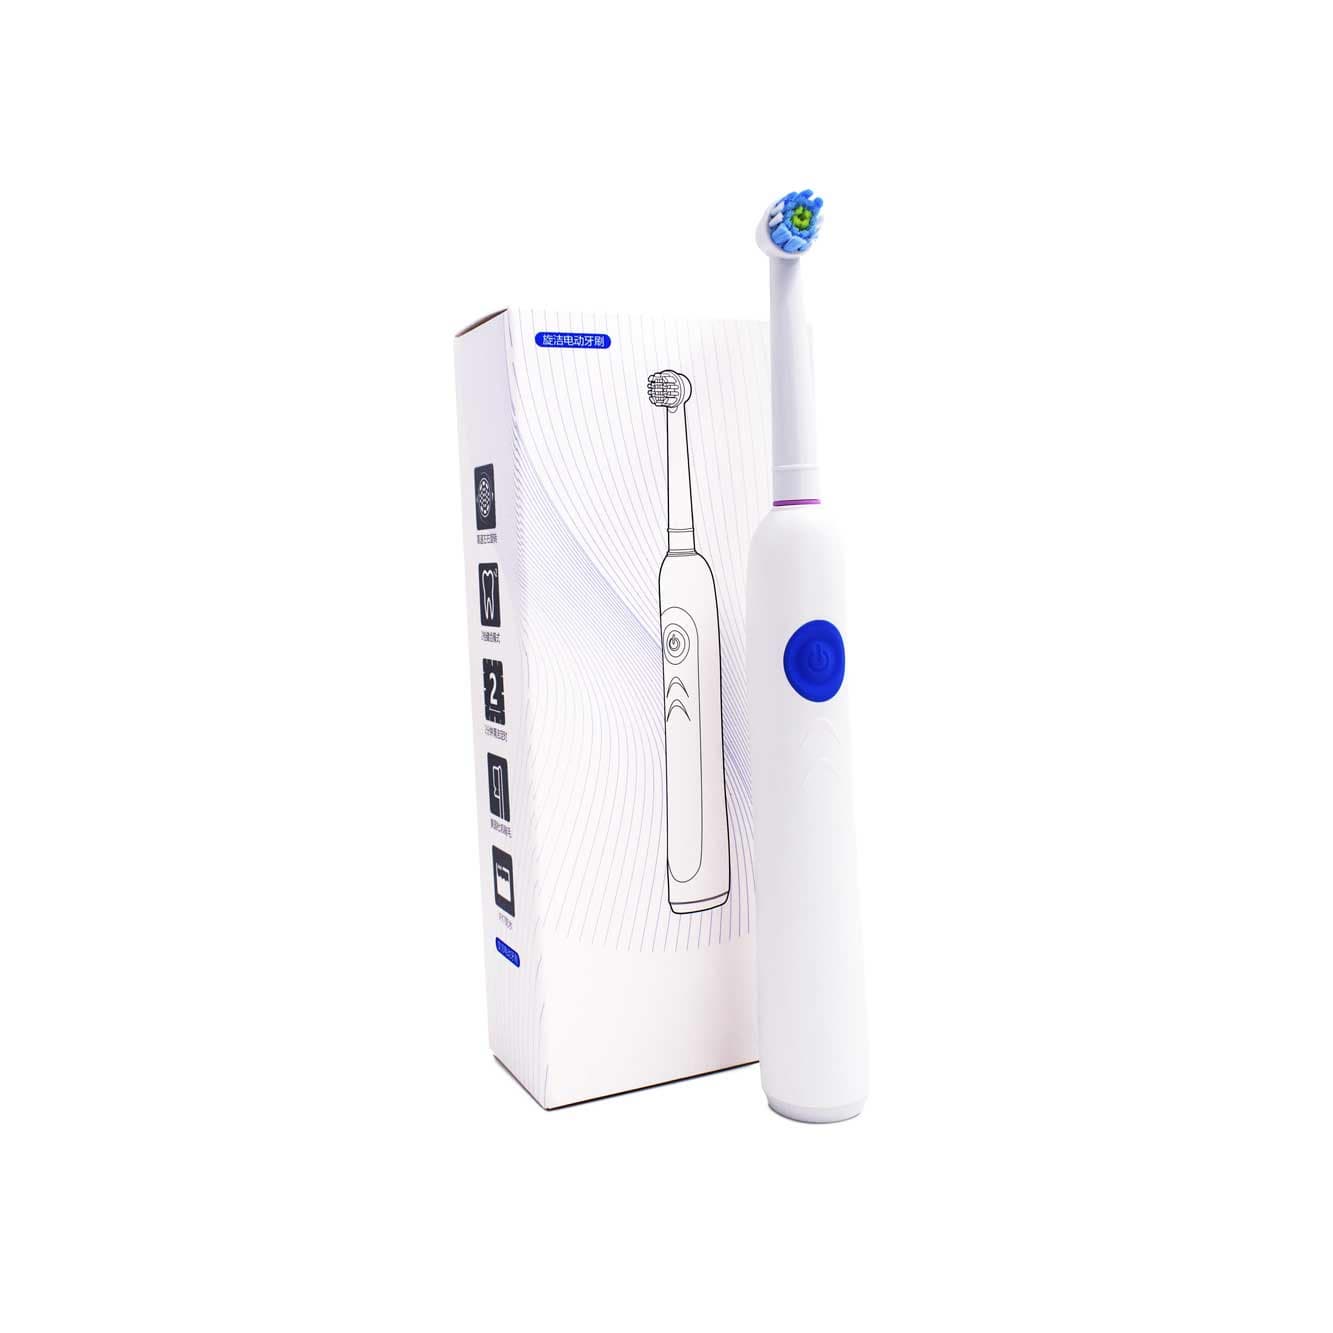 Electric toothbrush rotation with good electric toothbrush p